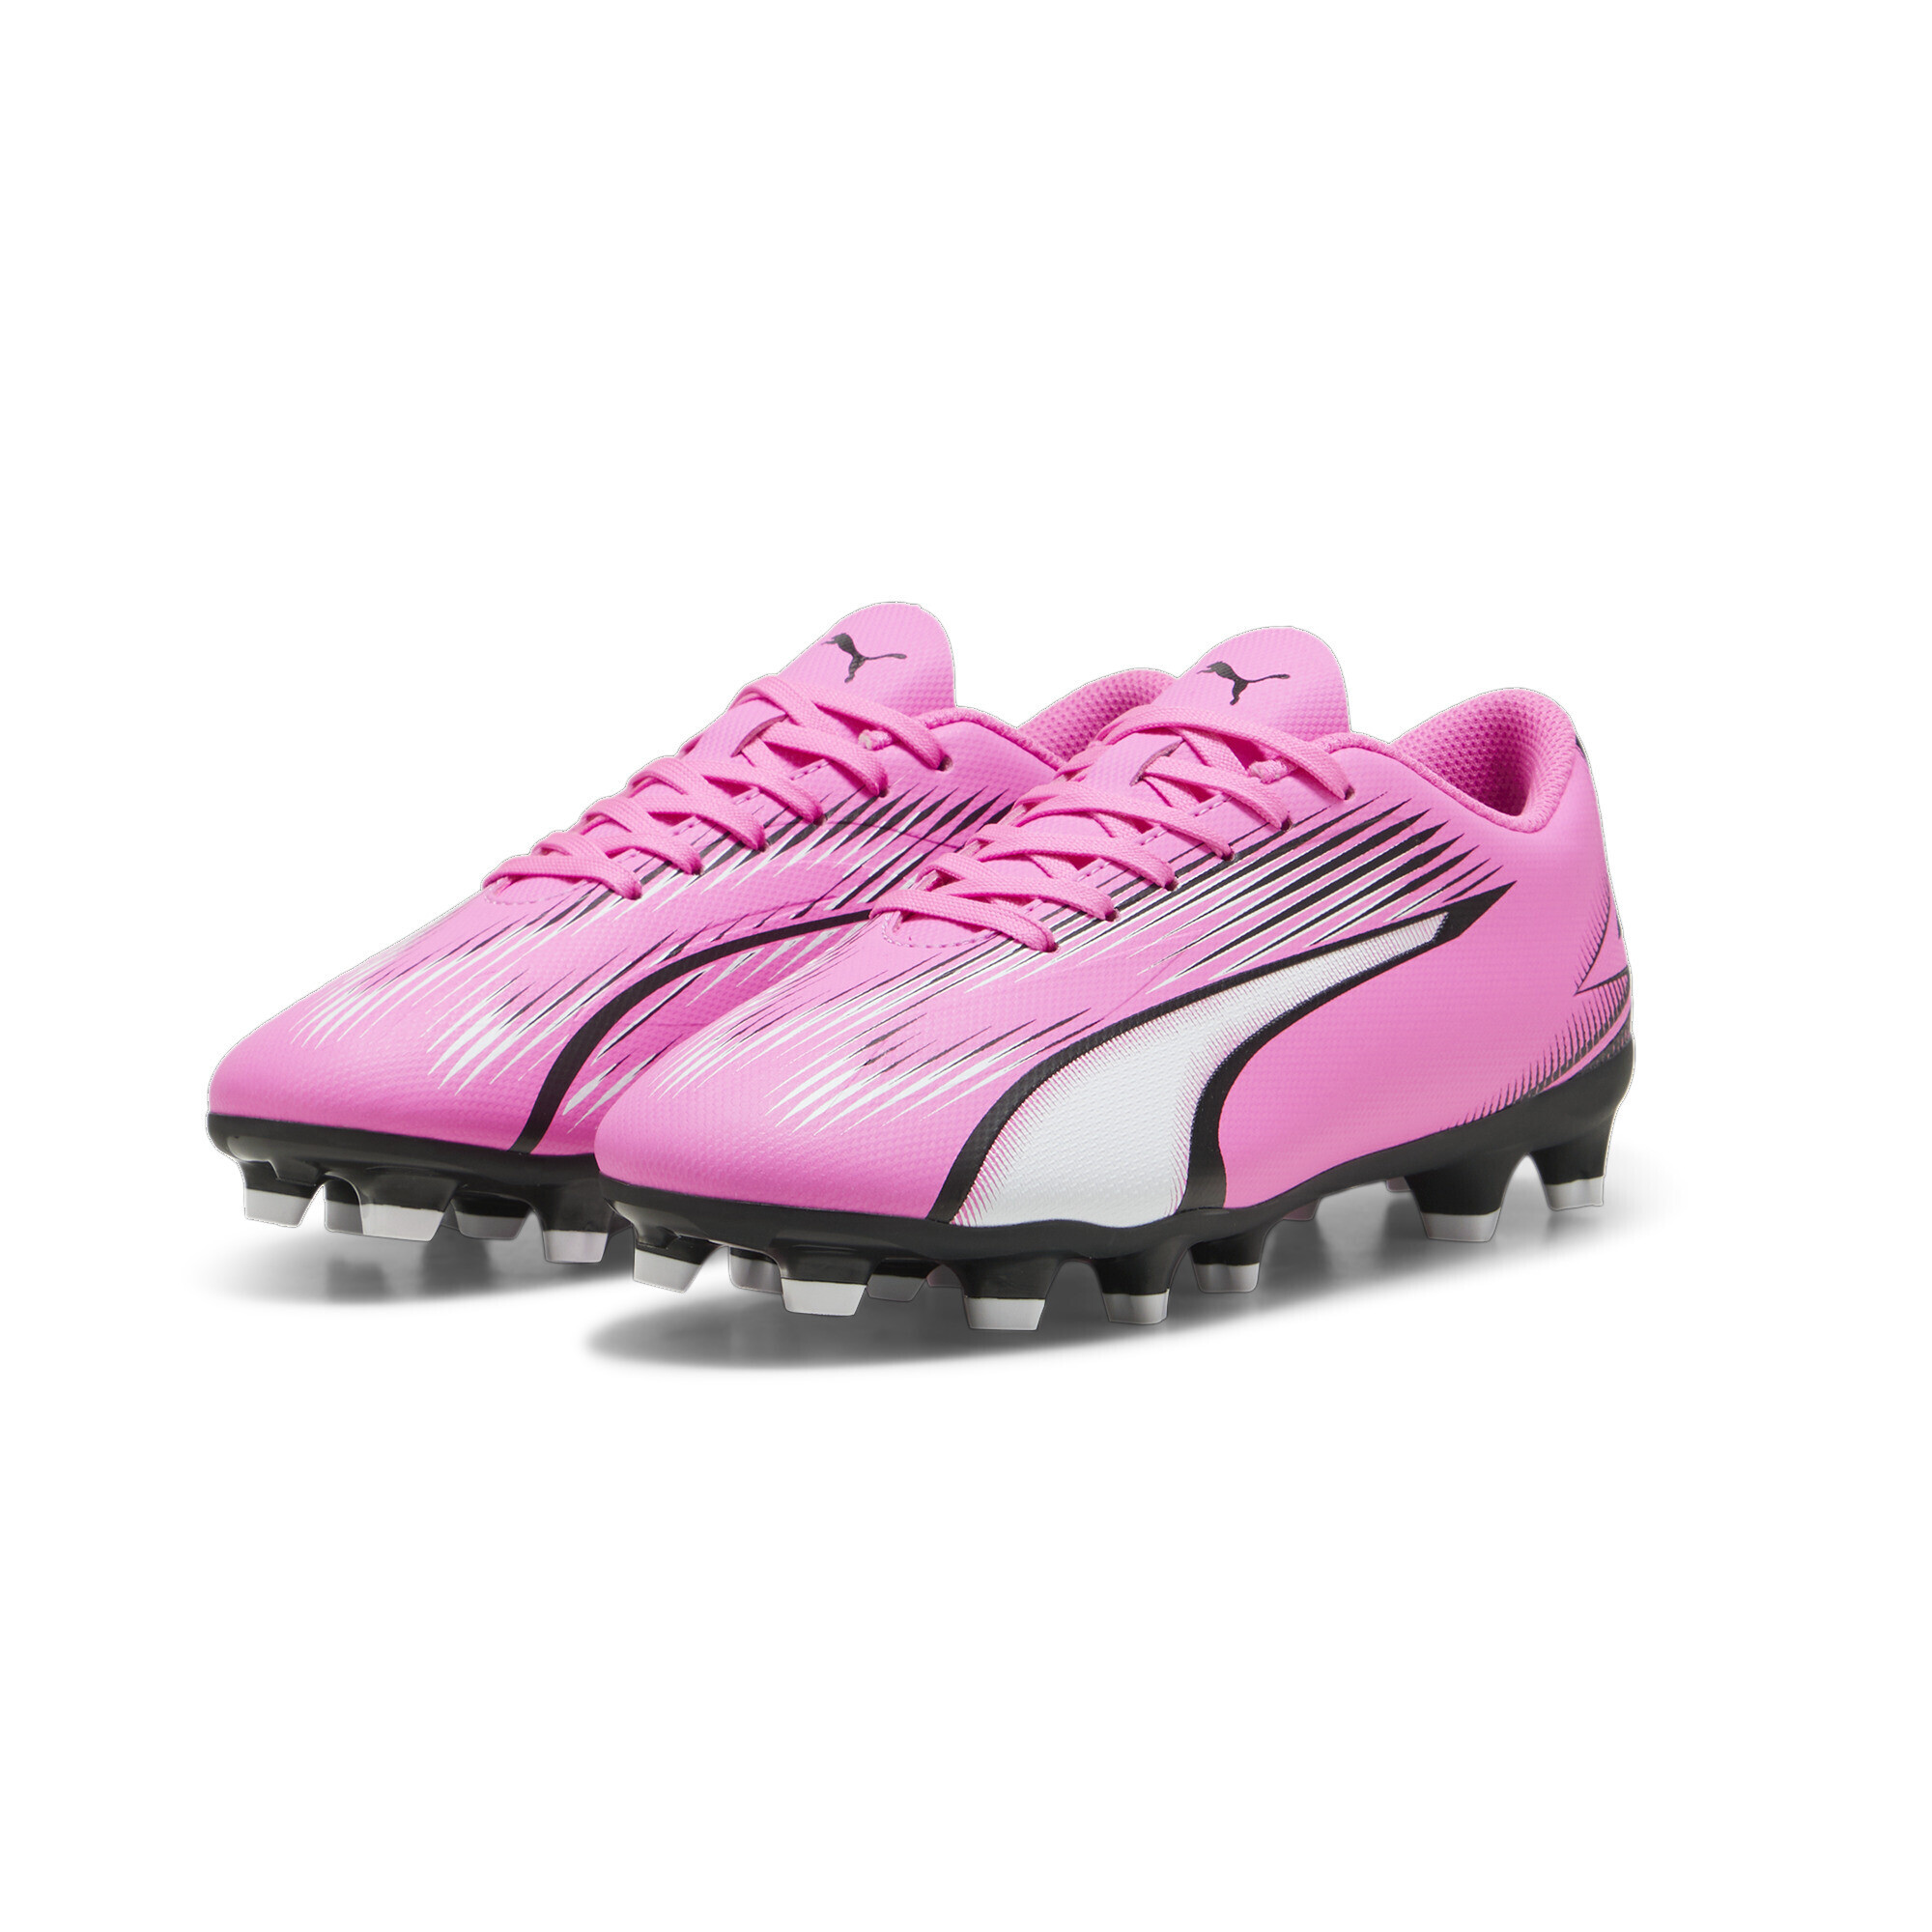 PUMA ULTRA PLAY FG/AG Youth Football Boots In Pink, Size EU 35